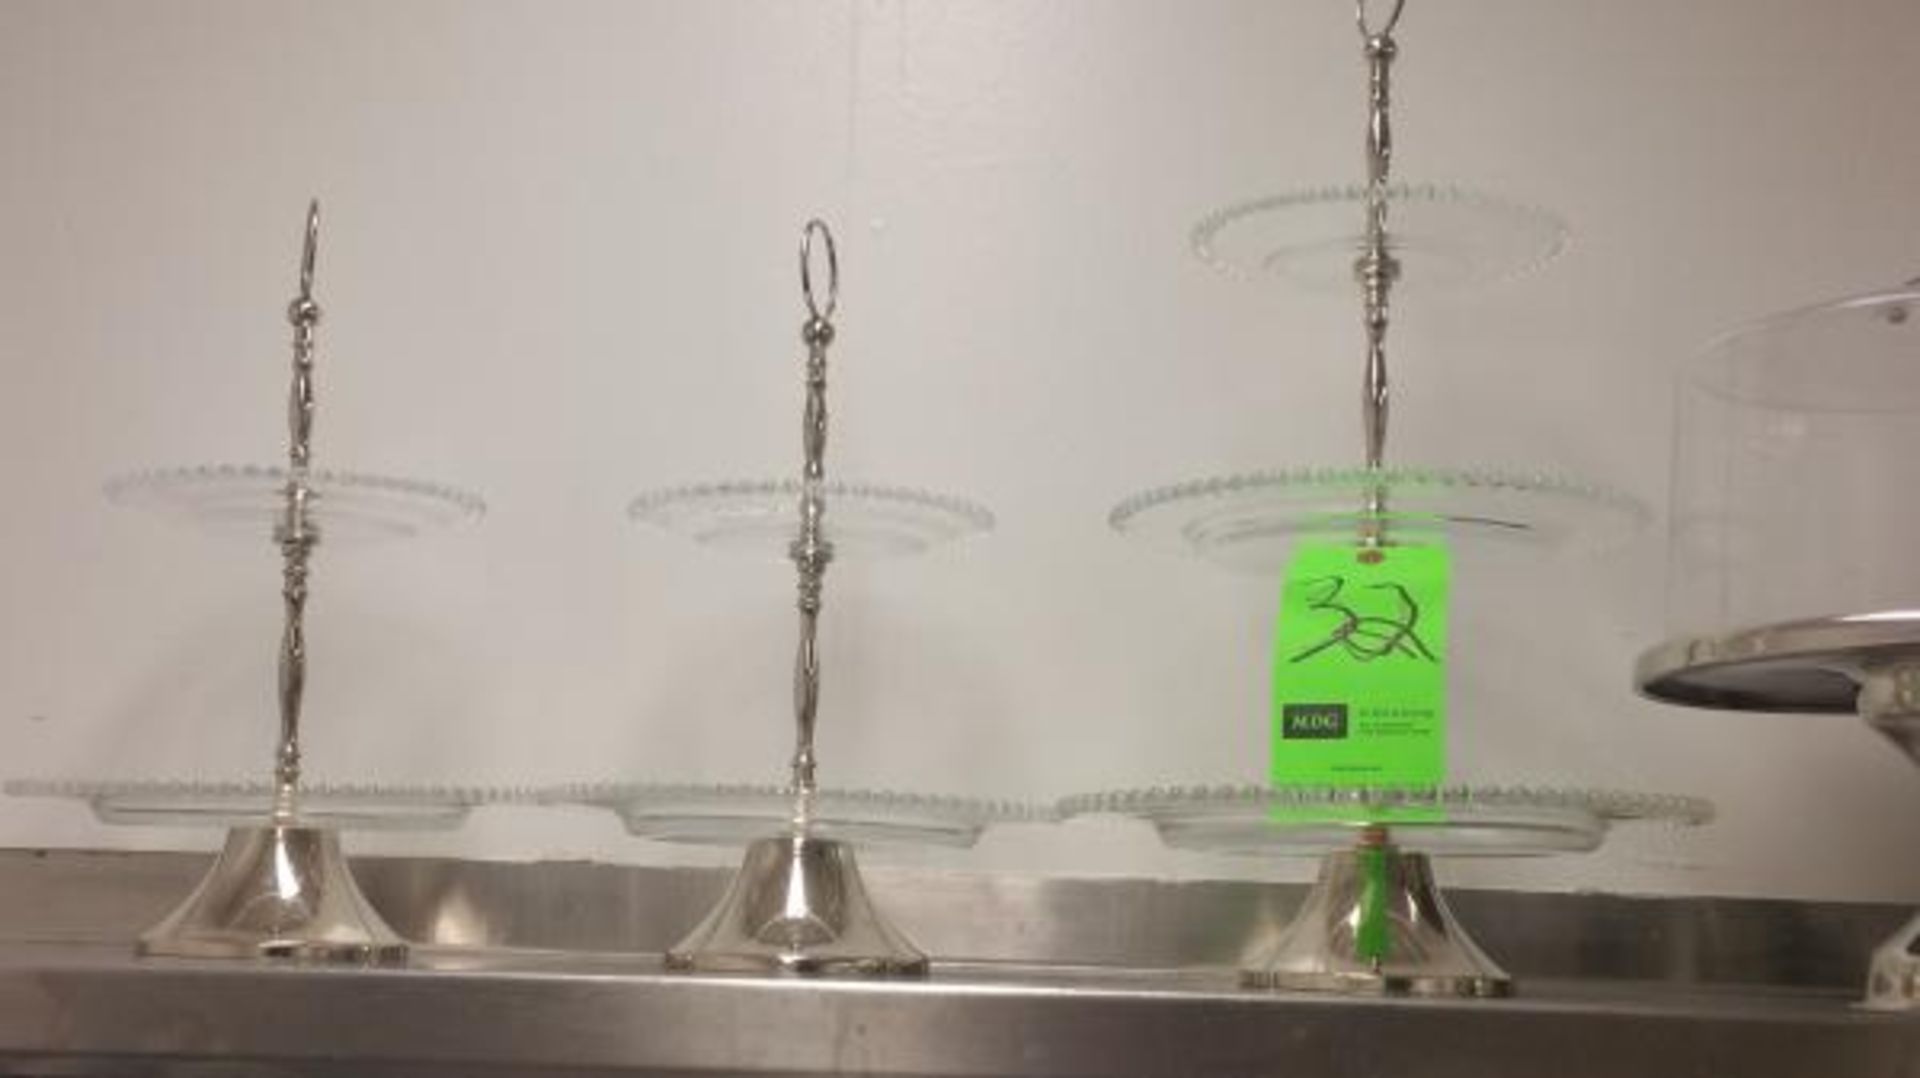 2 and 3 Tier Glass and Stainless Pastry Displays Rigging Cost: $10 - Image 3 of 3